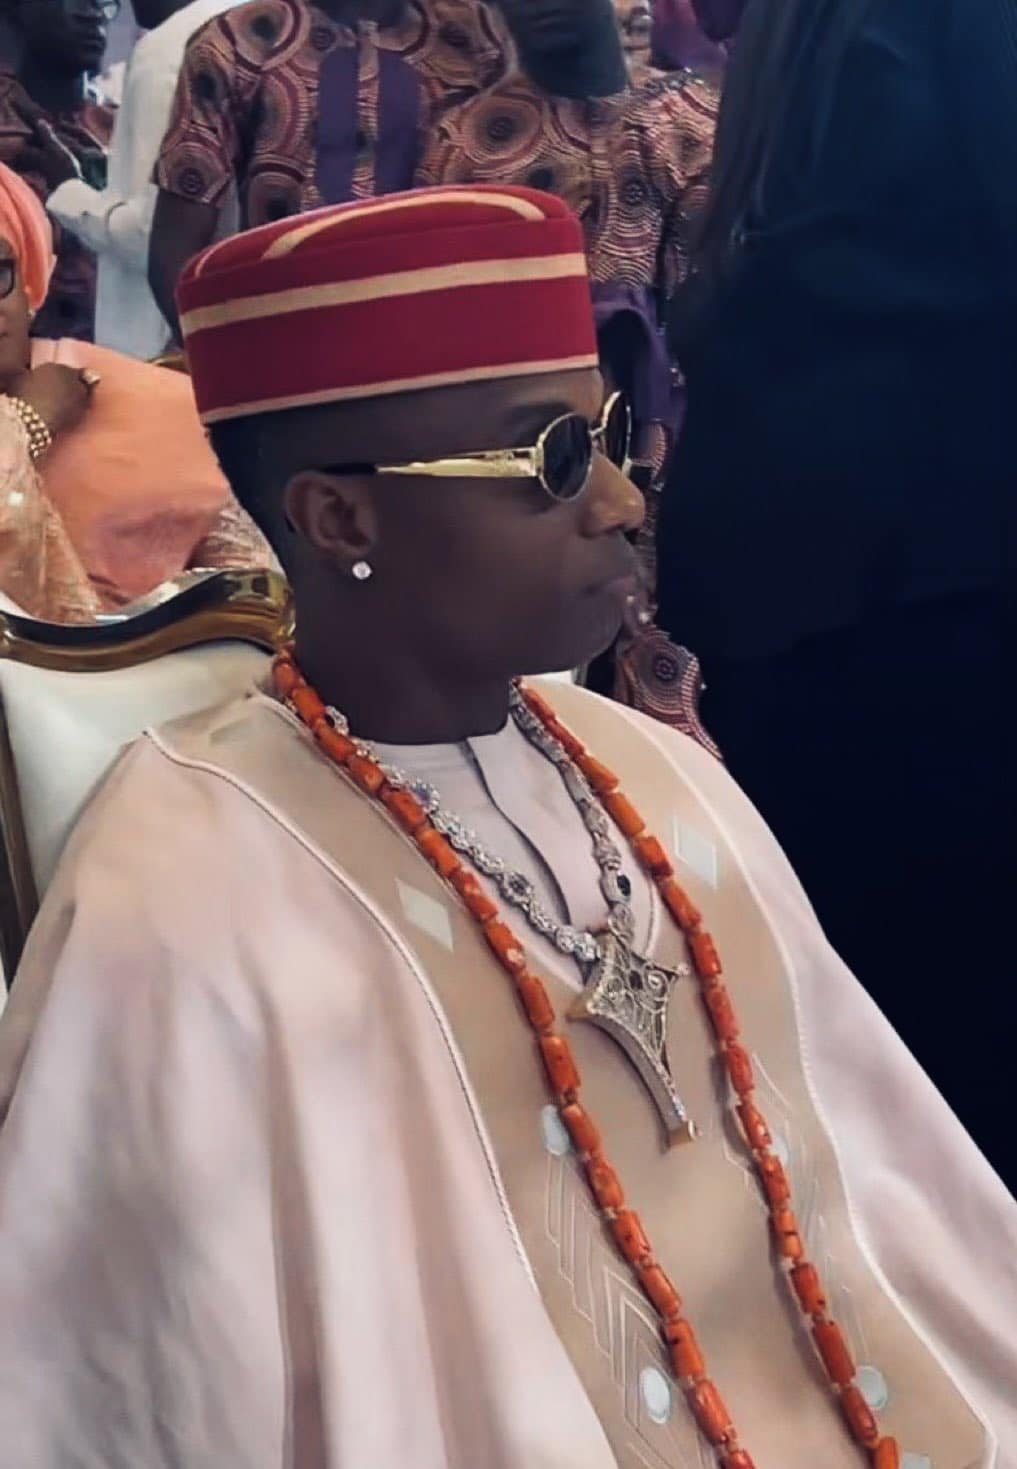 "That love still dey" - Tiwa Savage, Wizkid stirs reaction with soothing hug at his mum’s funeral party